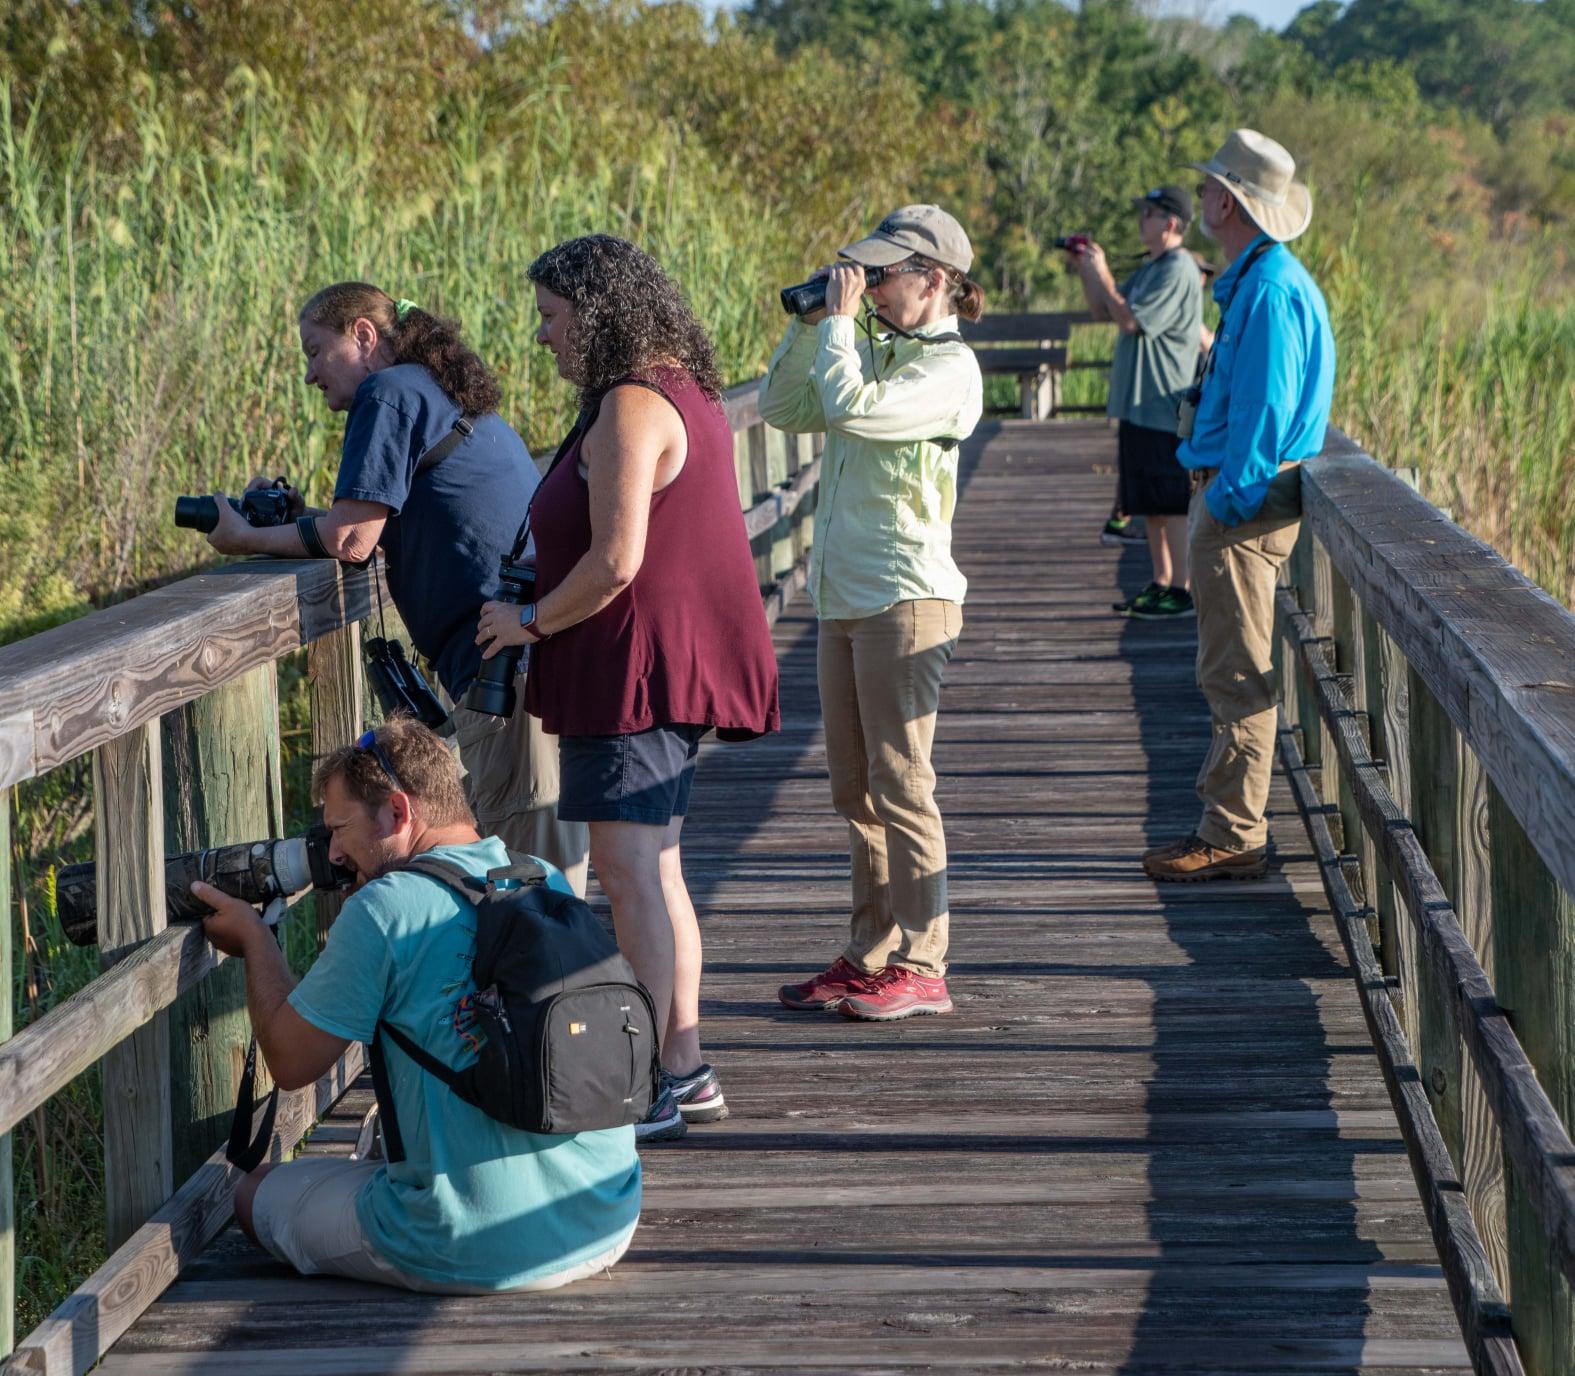 The Year of Alabama Birding in the Alabama State Parks